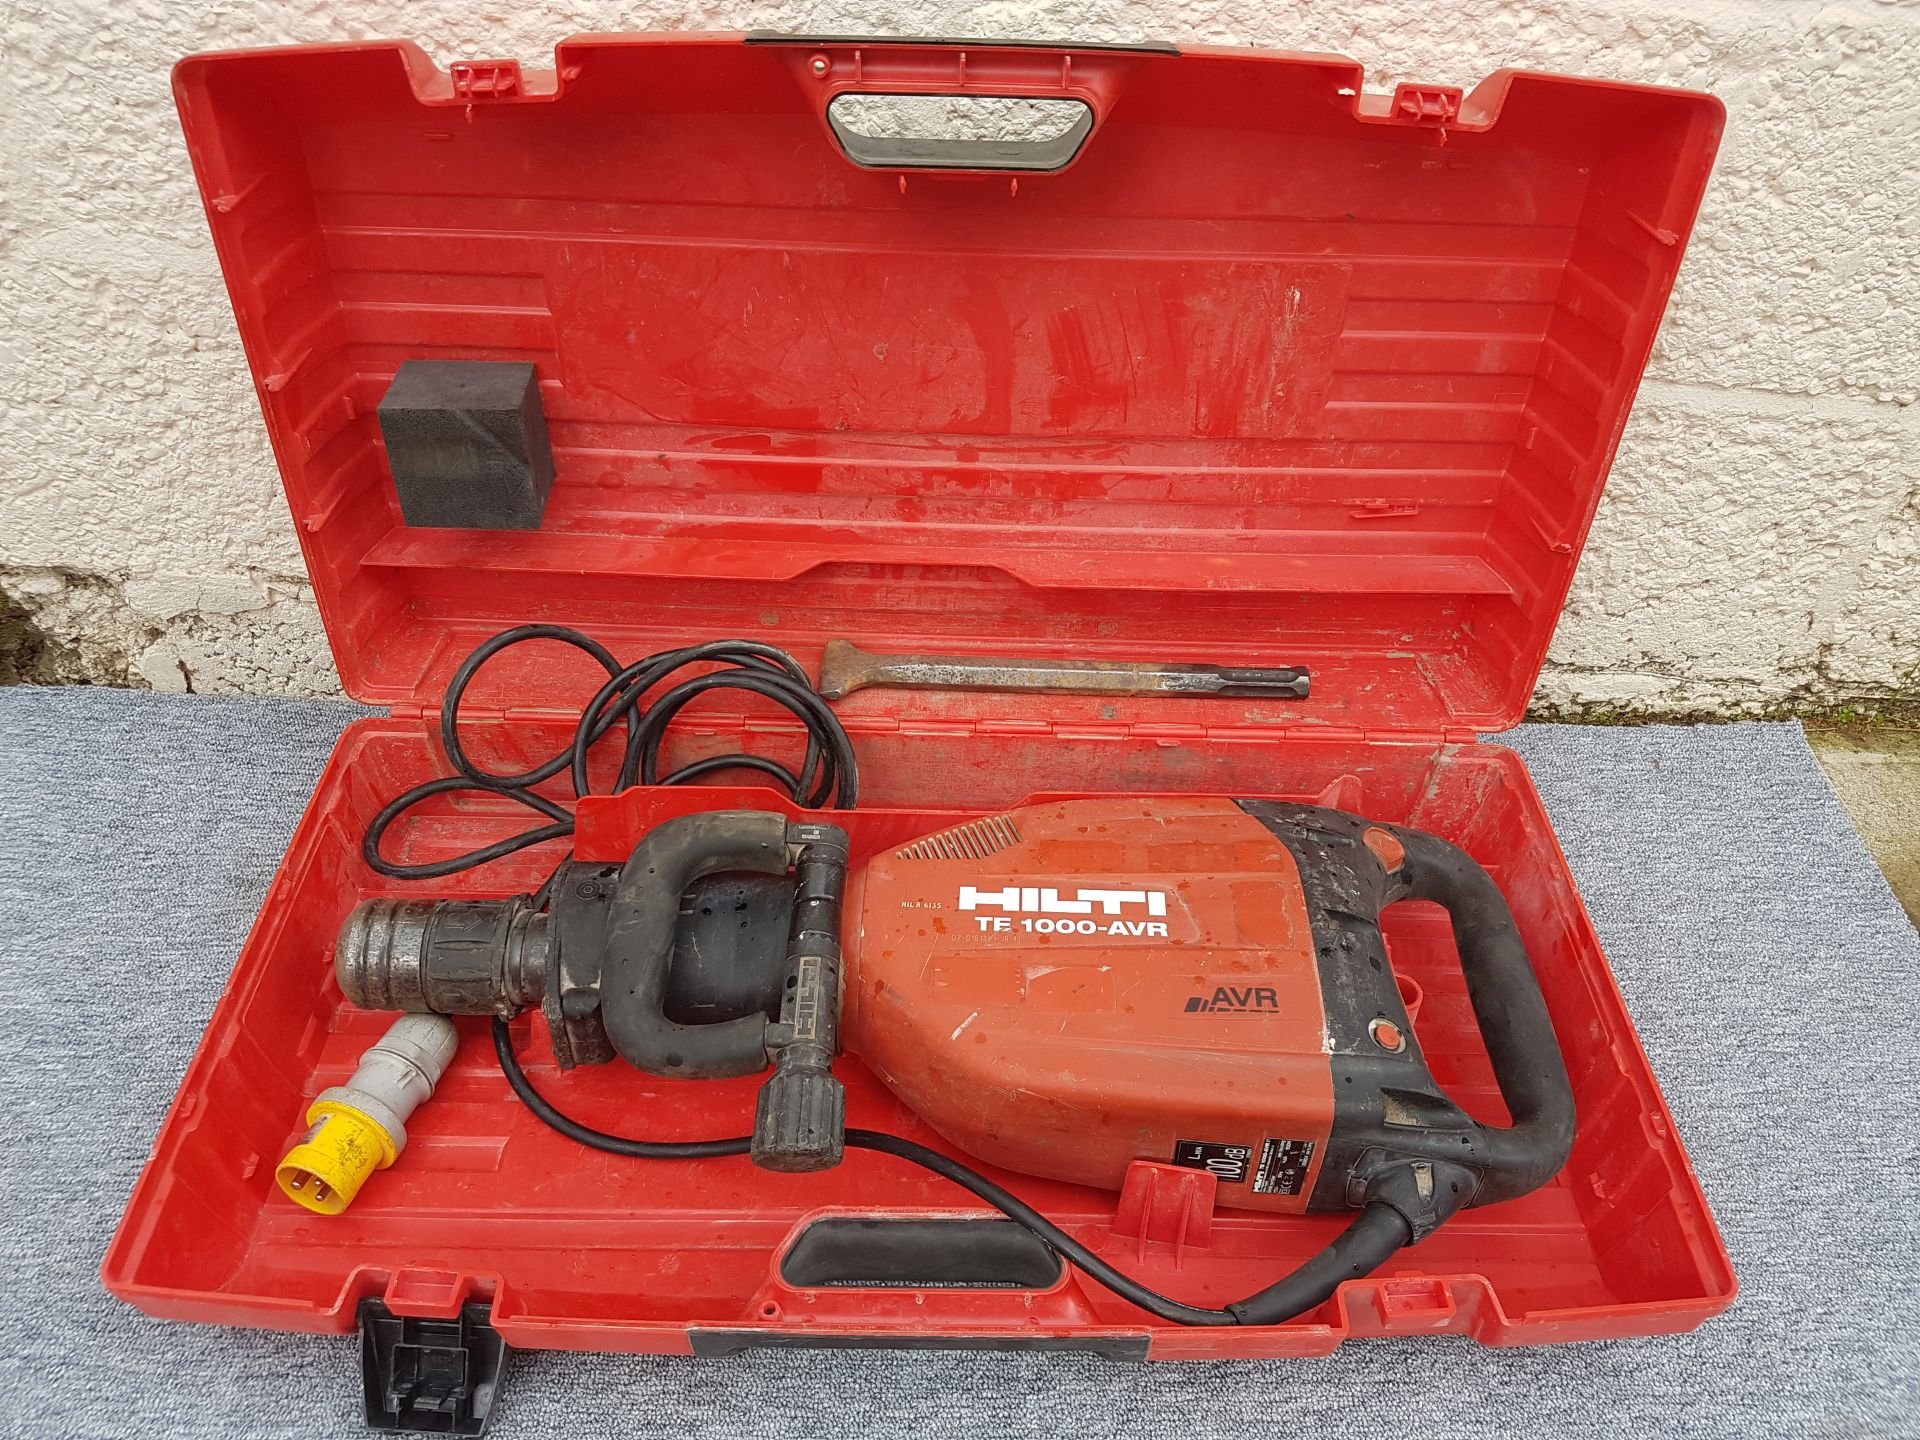 Hilti TE 1000 AVR Concrete Breaker with Chisel 110v in Box - Tested / In Working Order